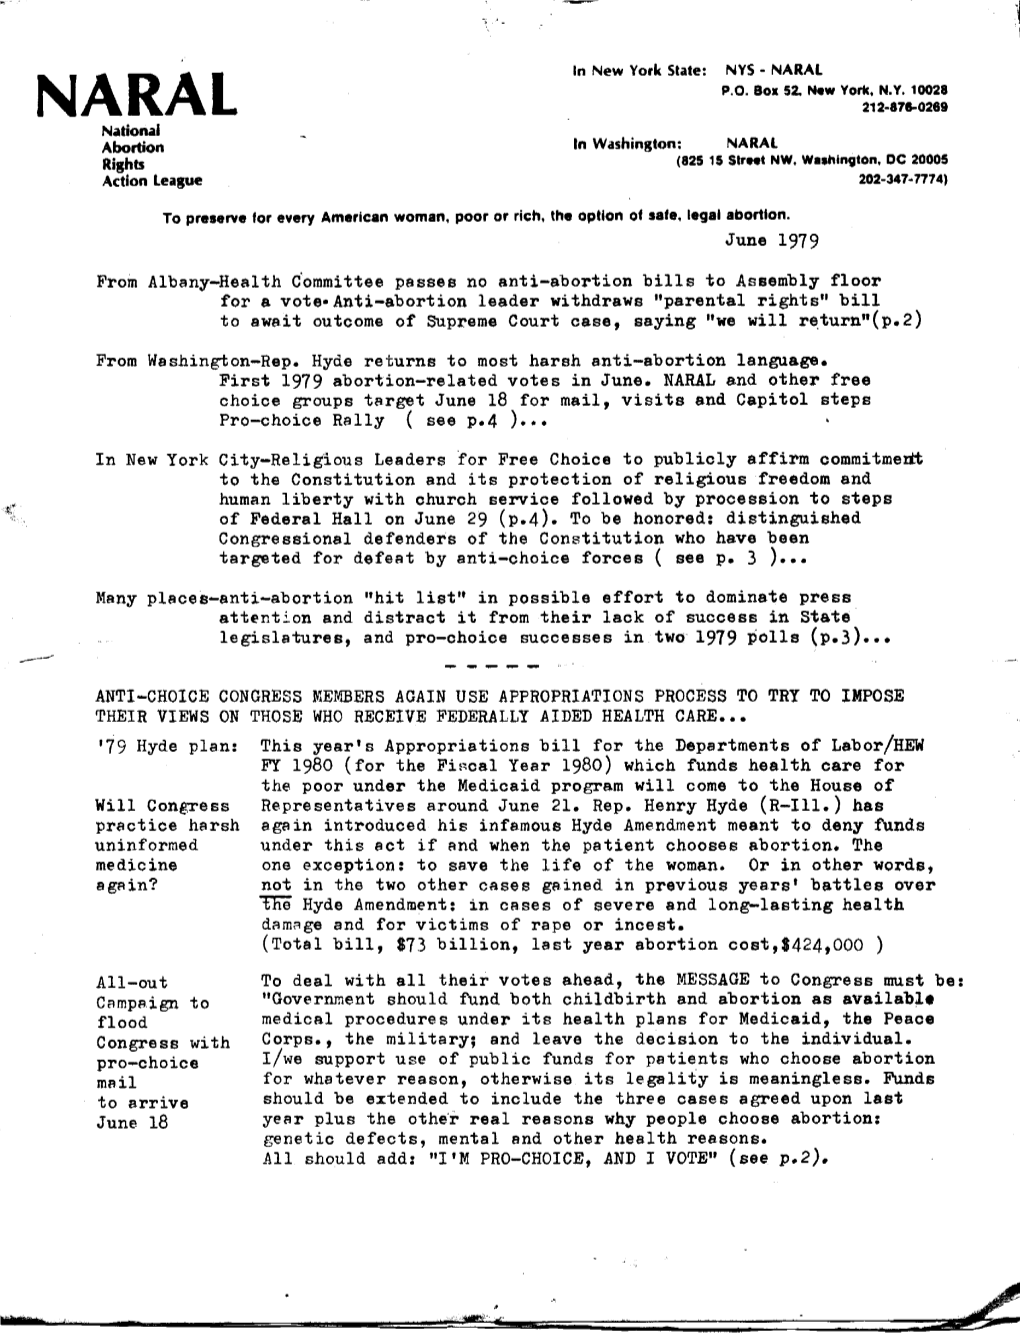 June 1979 from Albany-Health C·Ommi Ttee Passes No Anti-Abortion